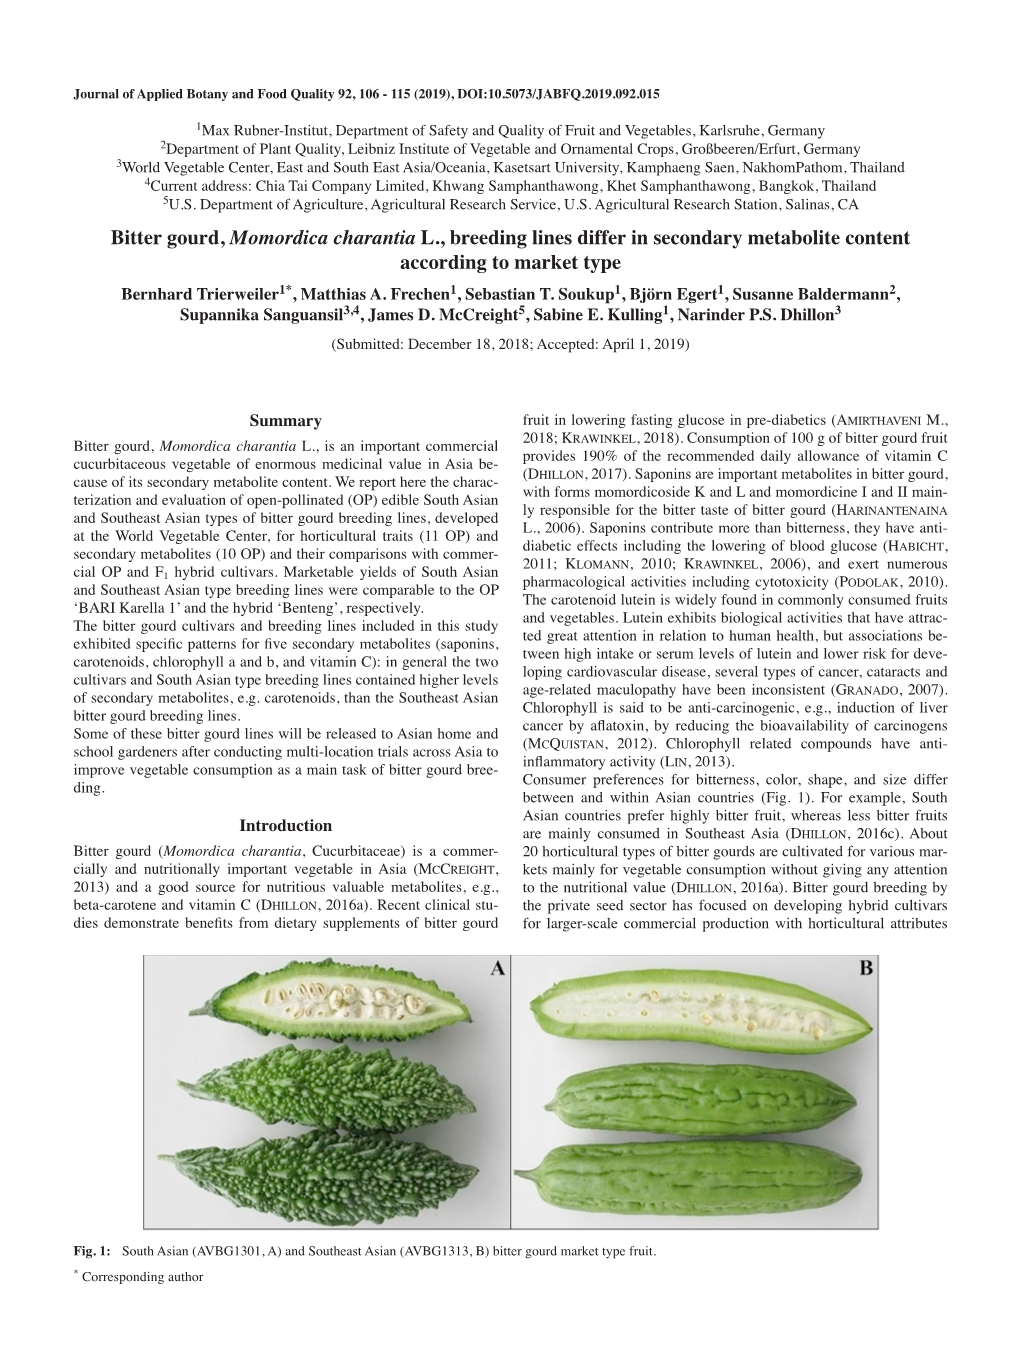 Bitter Gourd, Momordica Charantia L., Breeding Lines Differ in Secondary Metabolite Content According to Market Type Bernhard Trierweiler1*, Matthias A